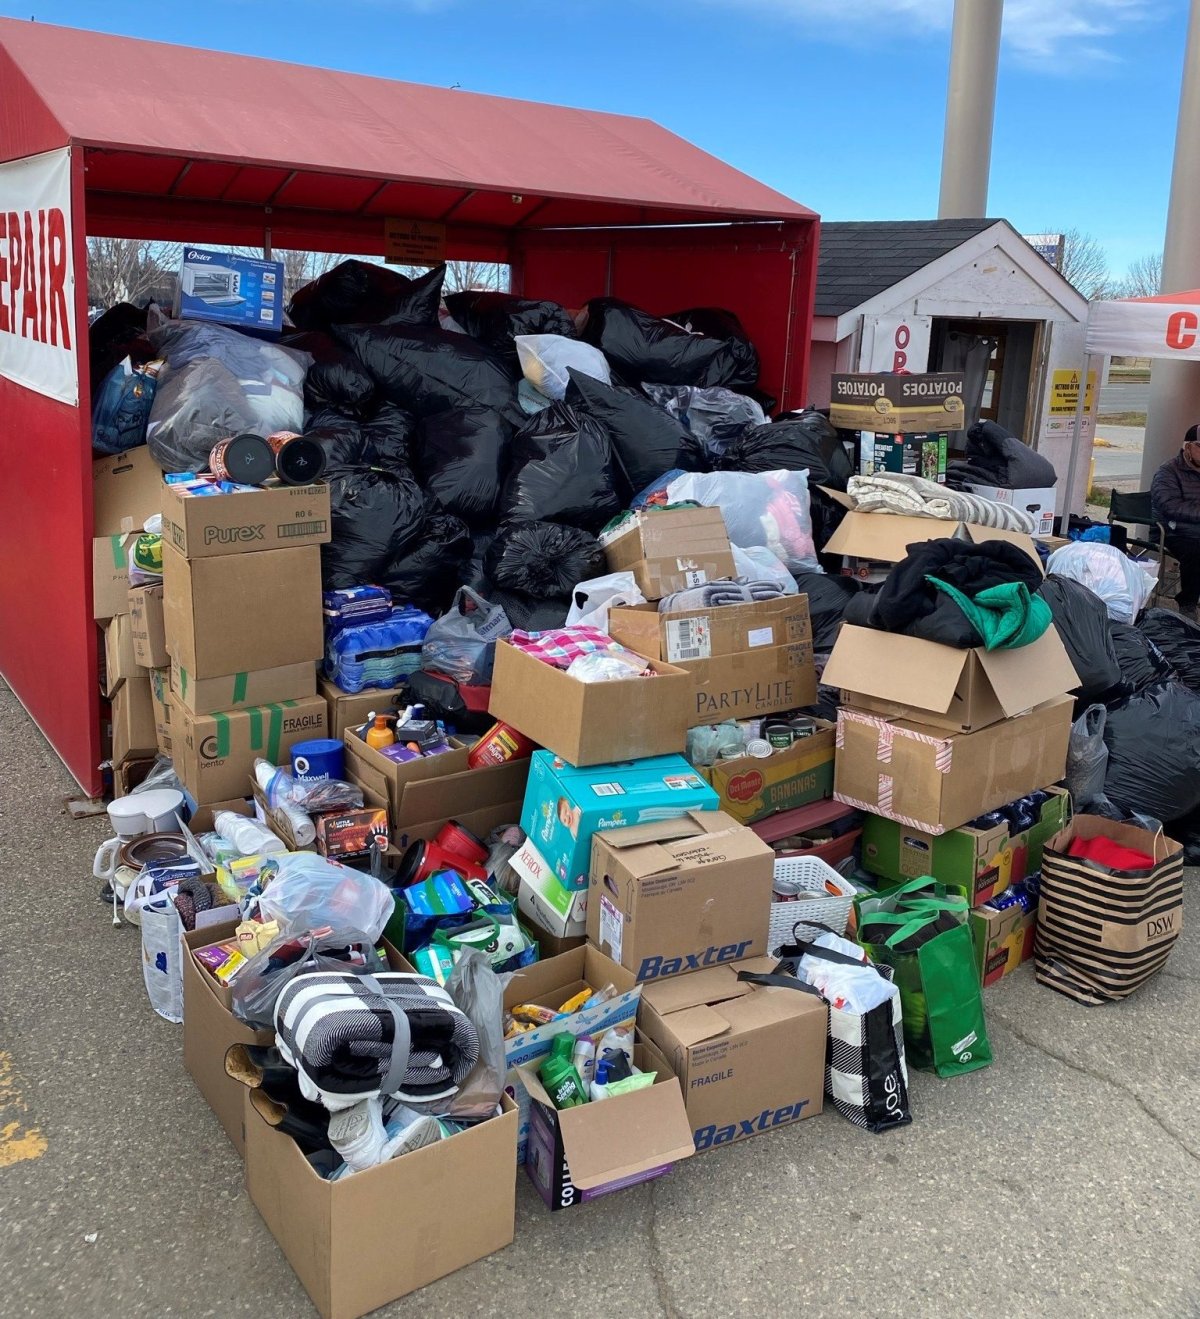 A local business hosts an event to fill a tent with donated items from winter coats to toiletries and taken to Awasiw where they will be distributed to those in need.